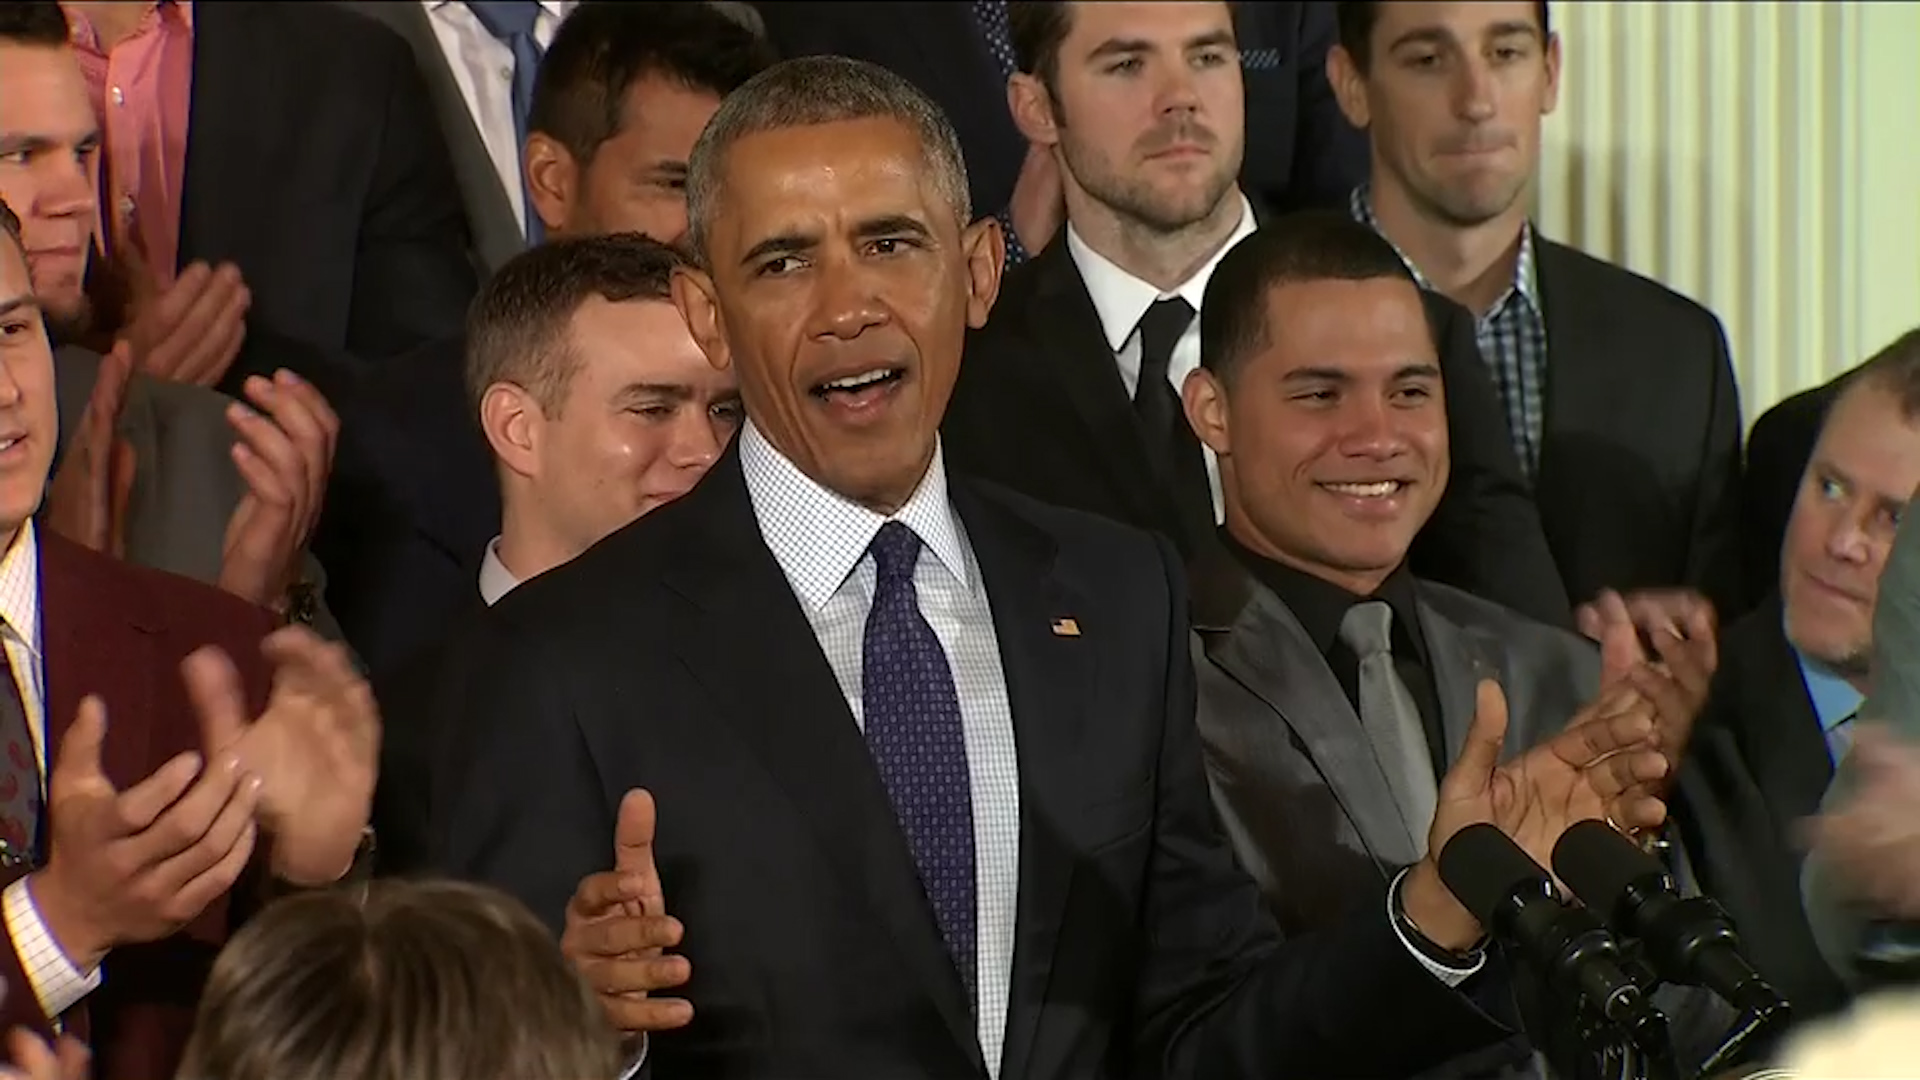 Obama doesn't like your favorite baseball team (unless it's the